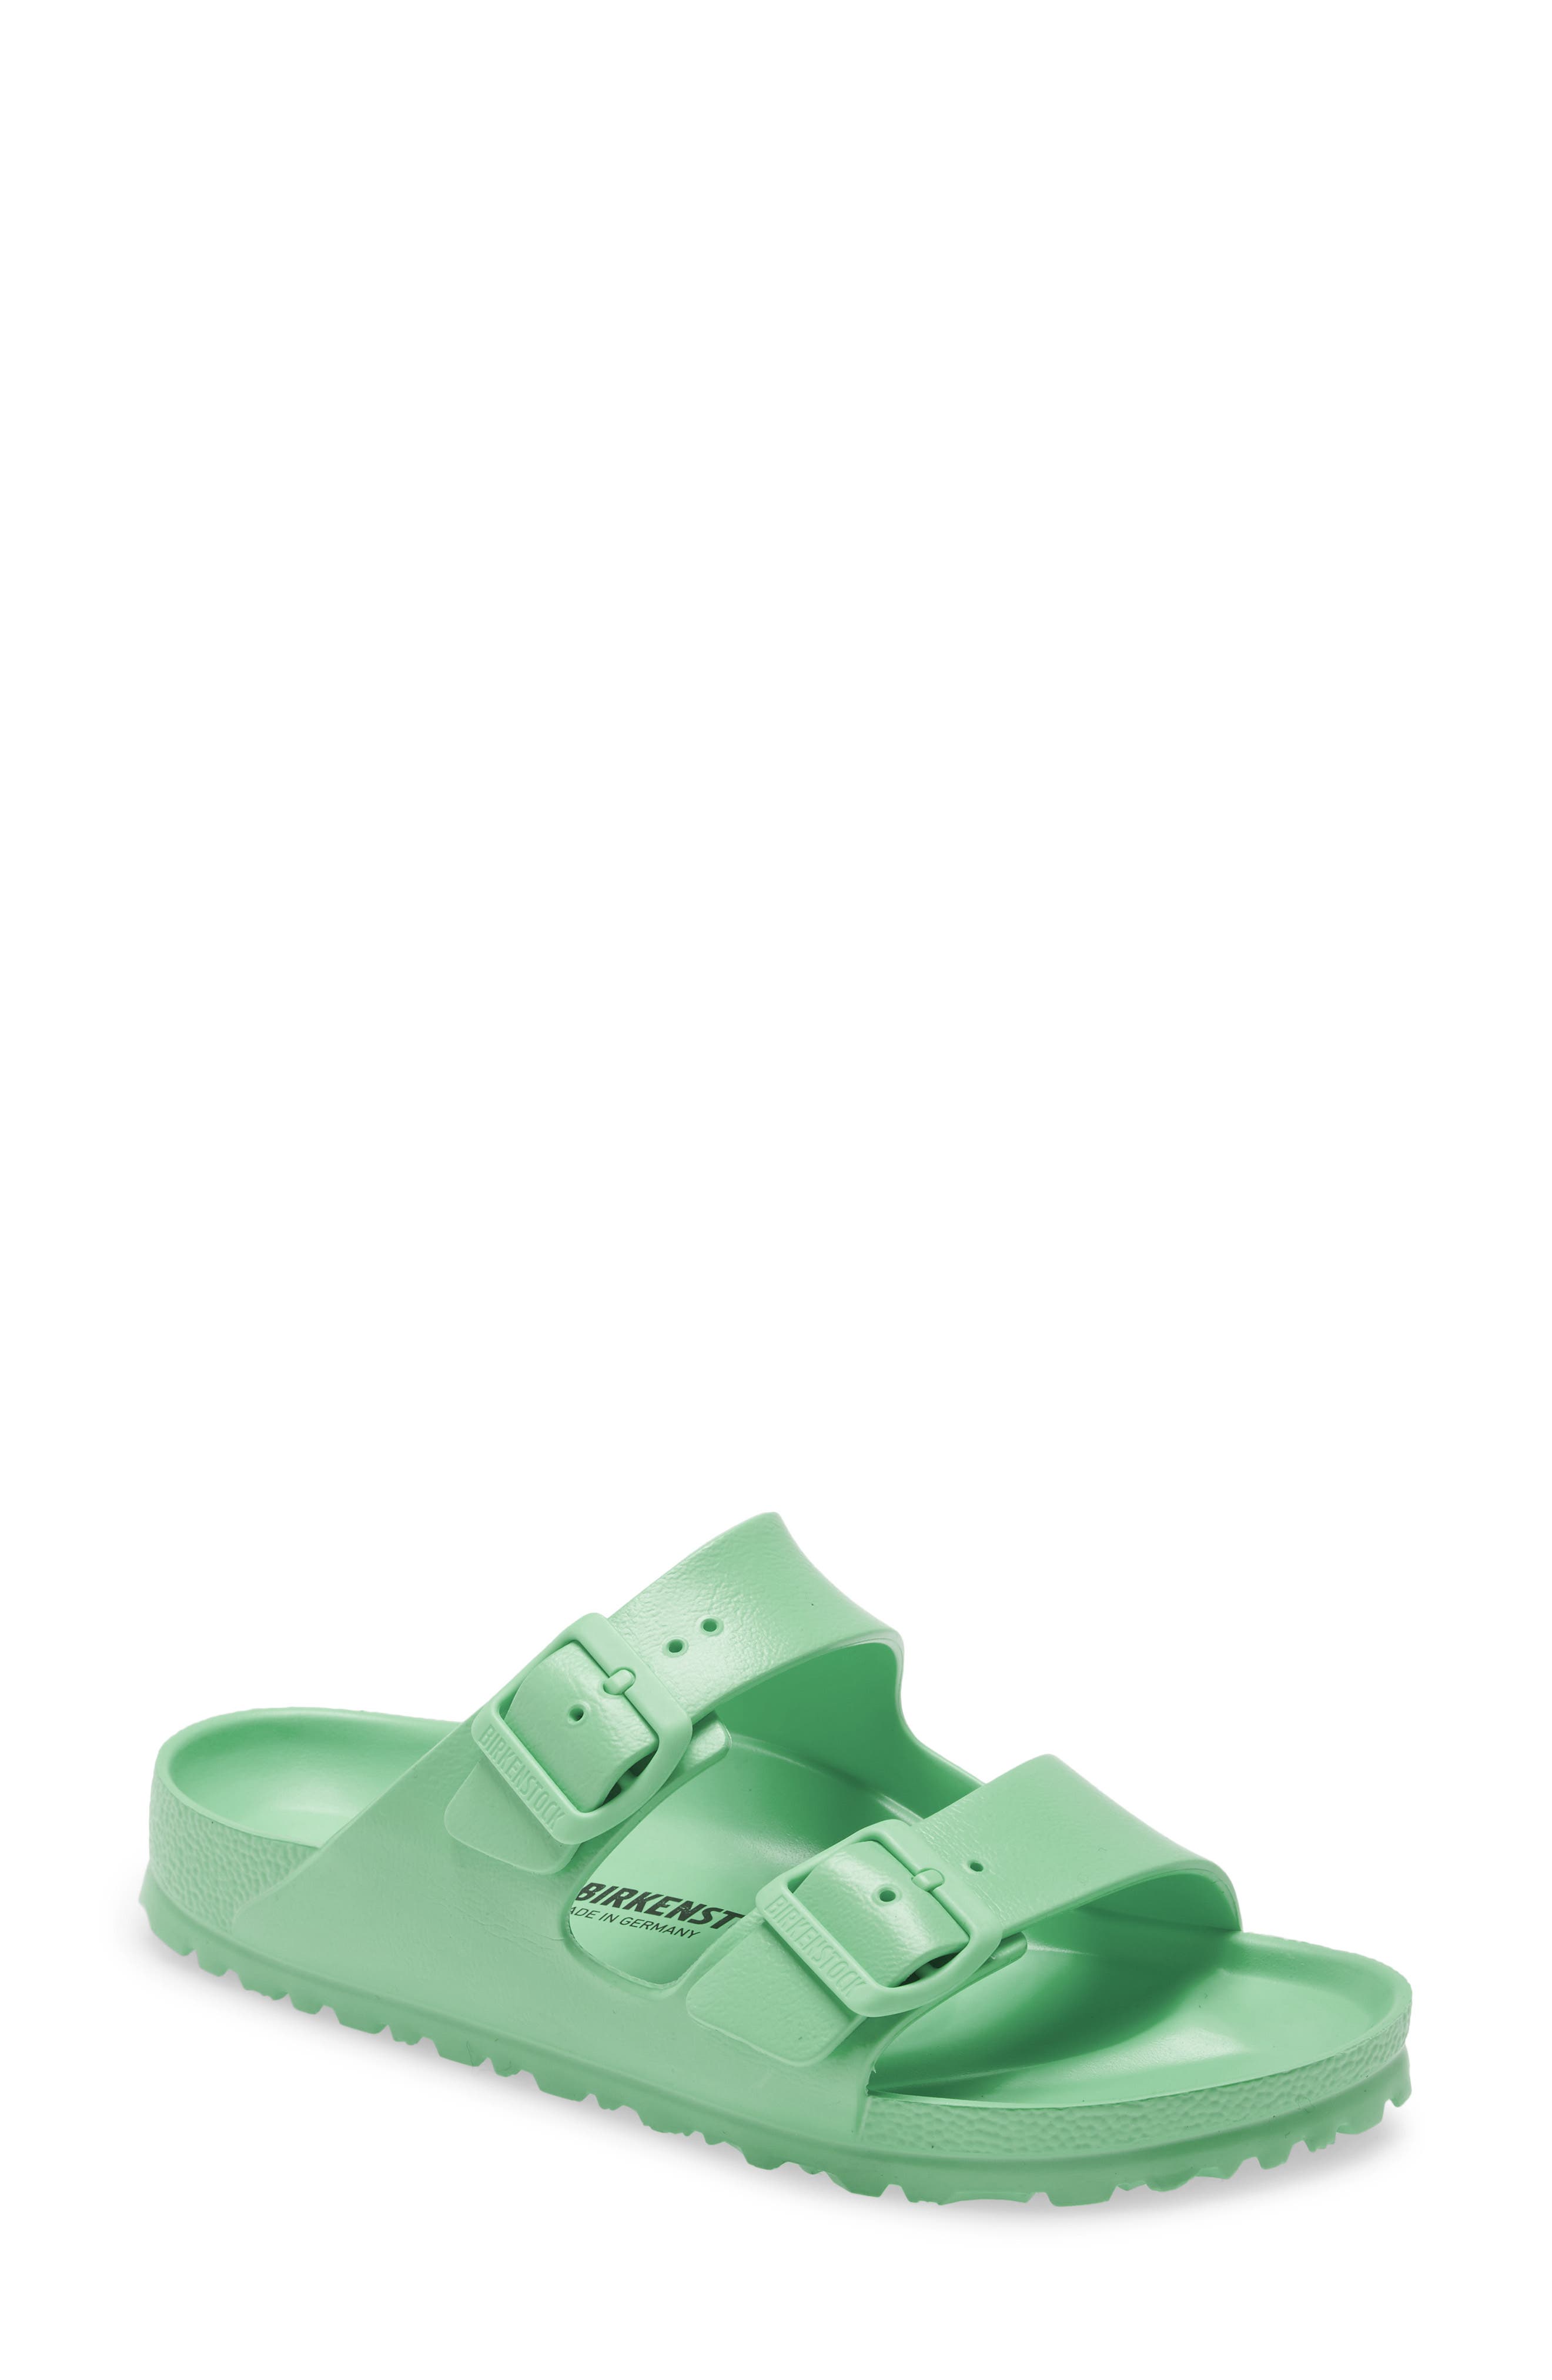 baby pool sandals